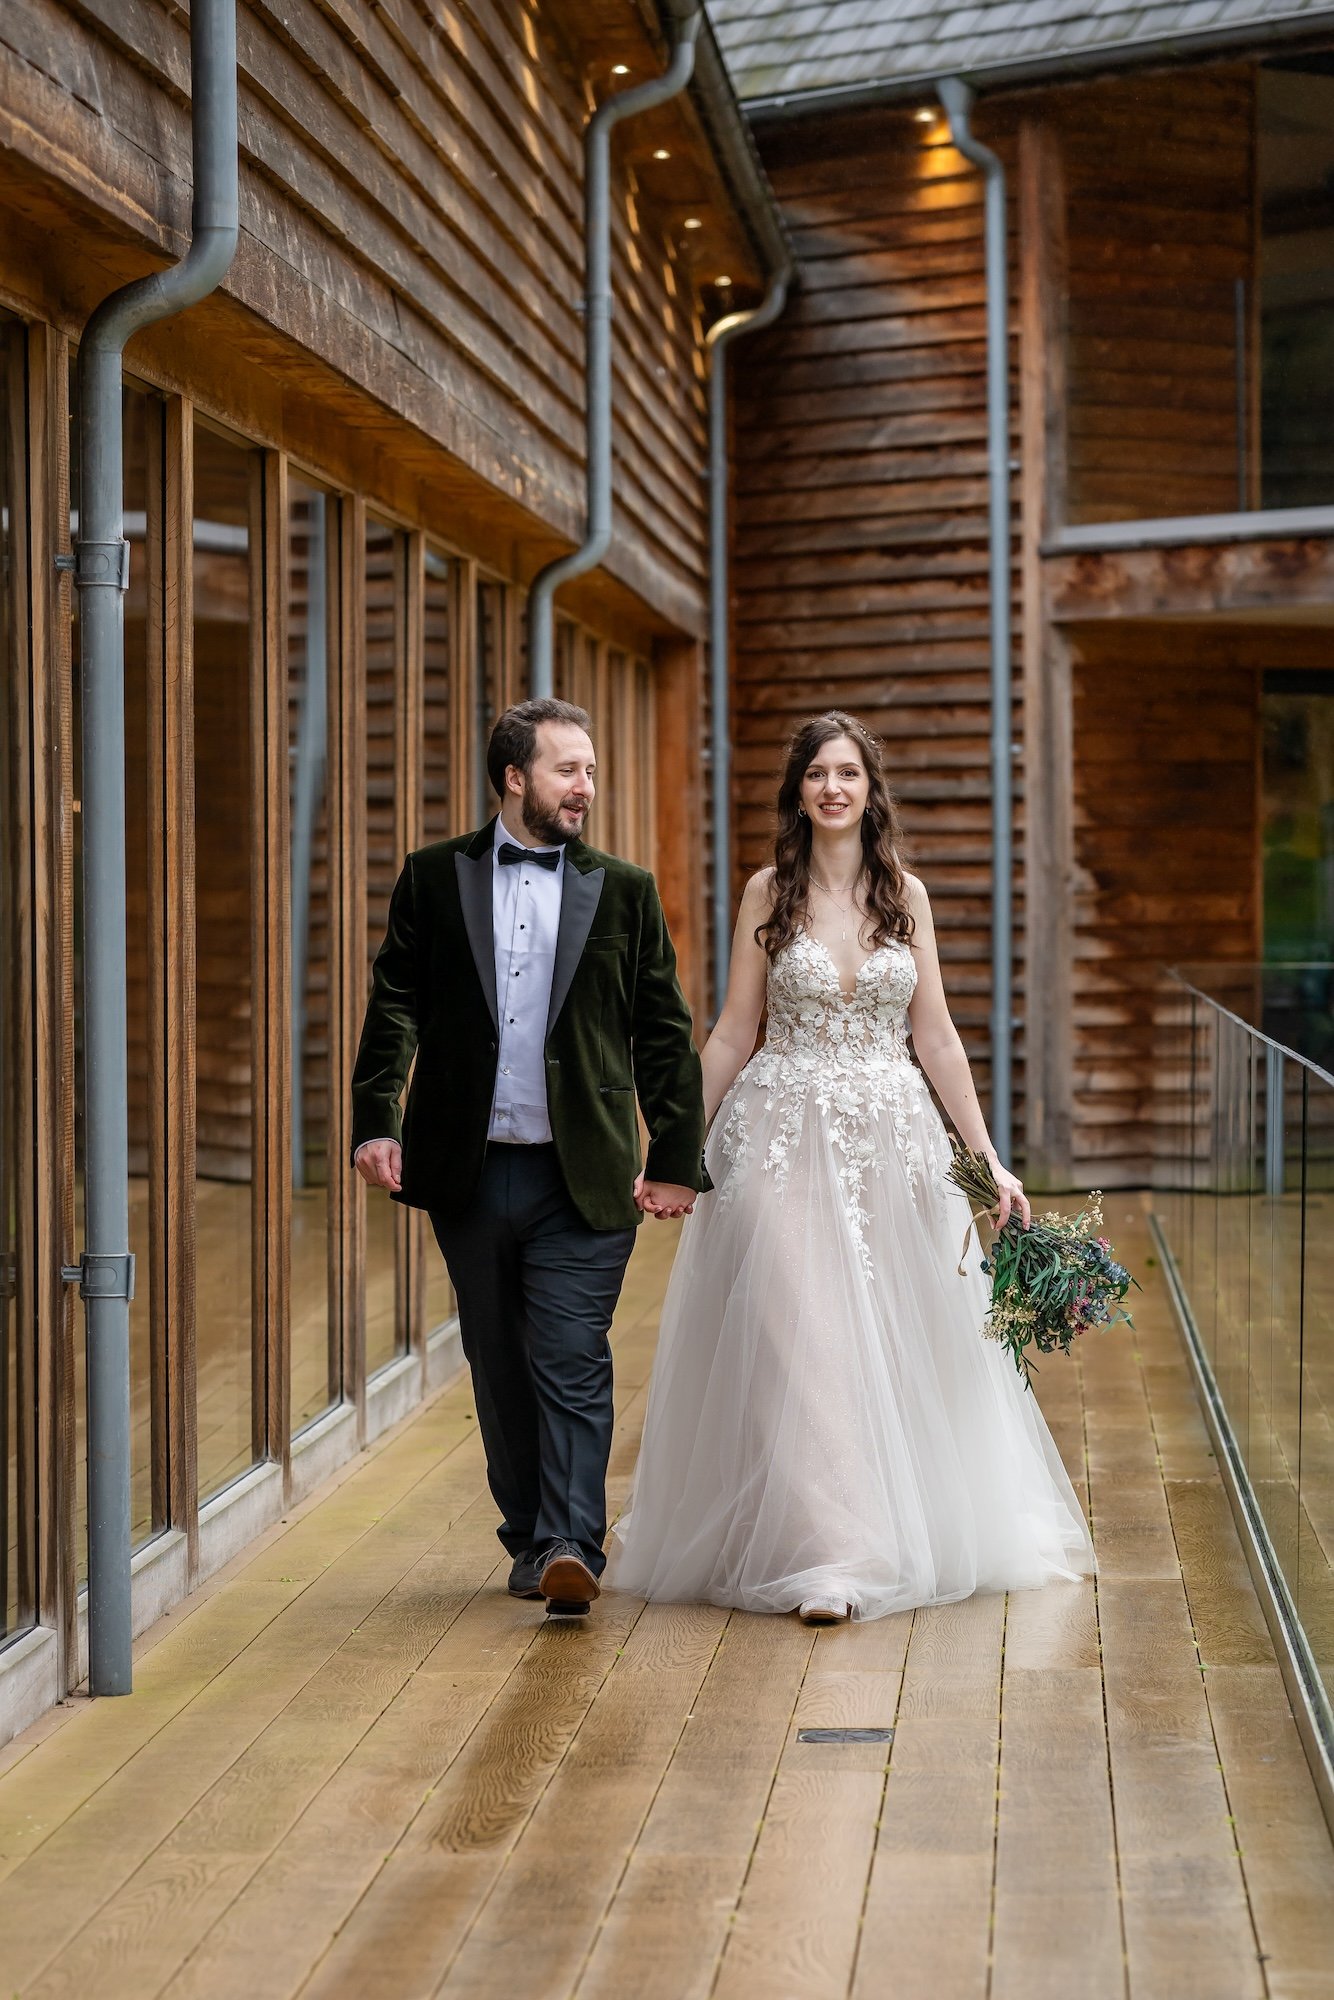 Jen and Tom walking the decking at The Mill Barns Wedding Venue